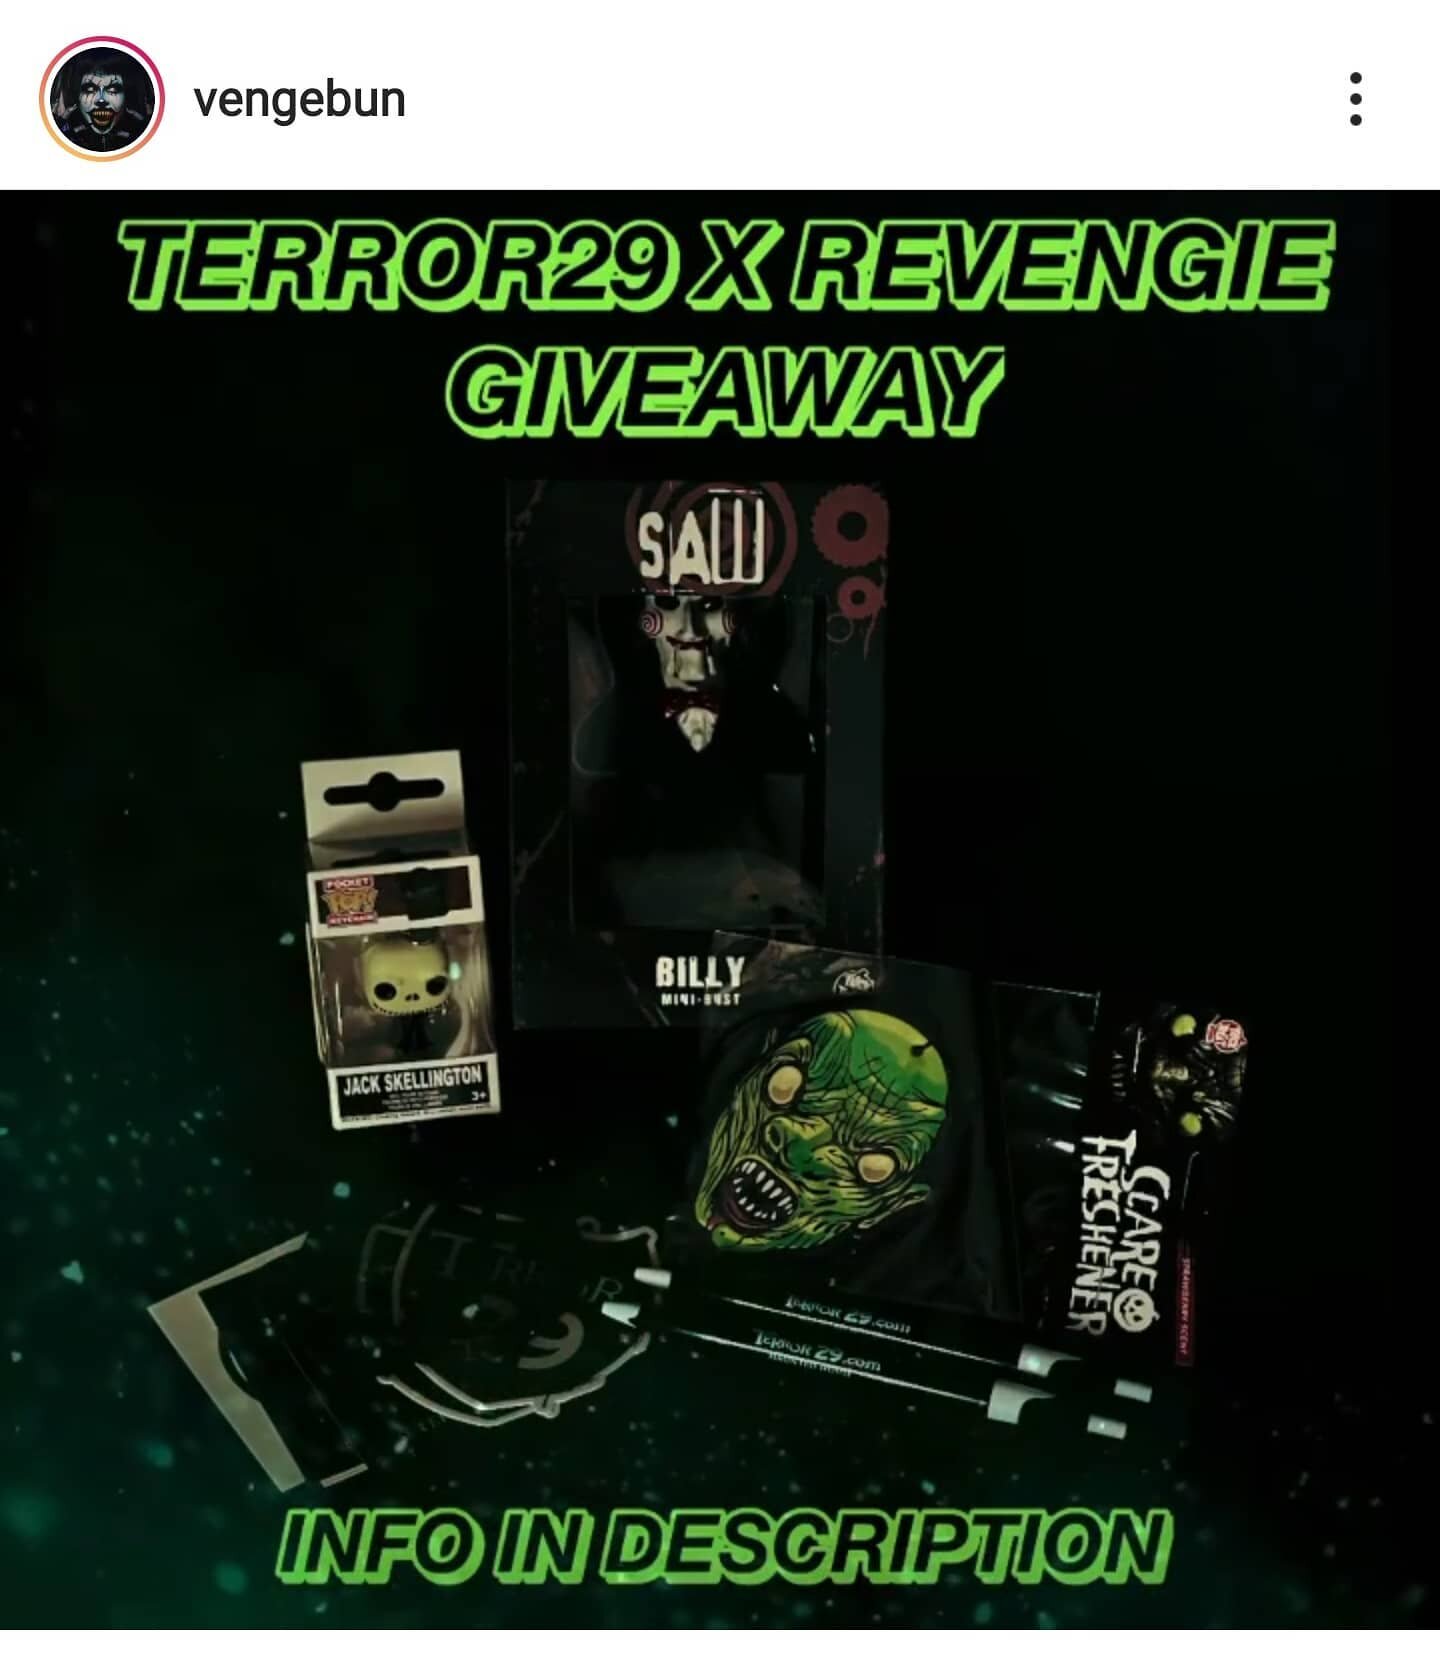 My girl @vengebun and @terror29haunt are doing a giveaway! Go check it out!